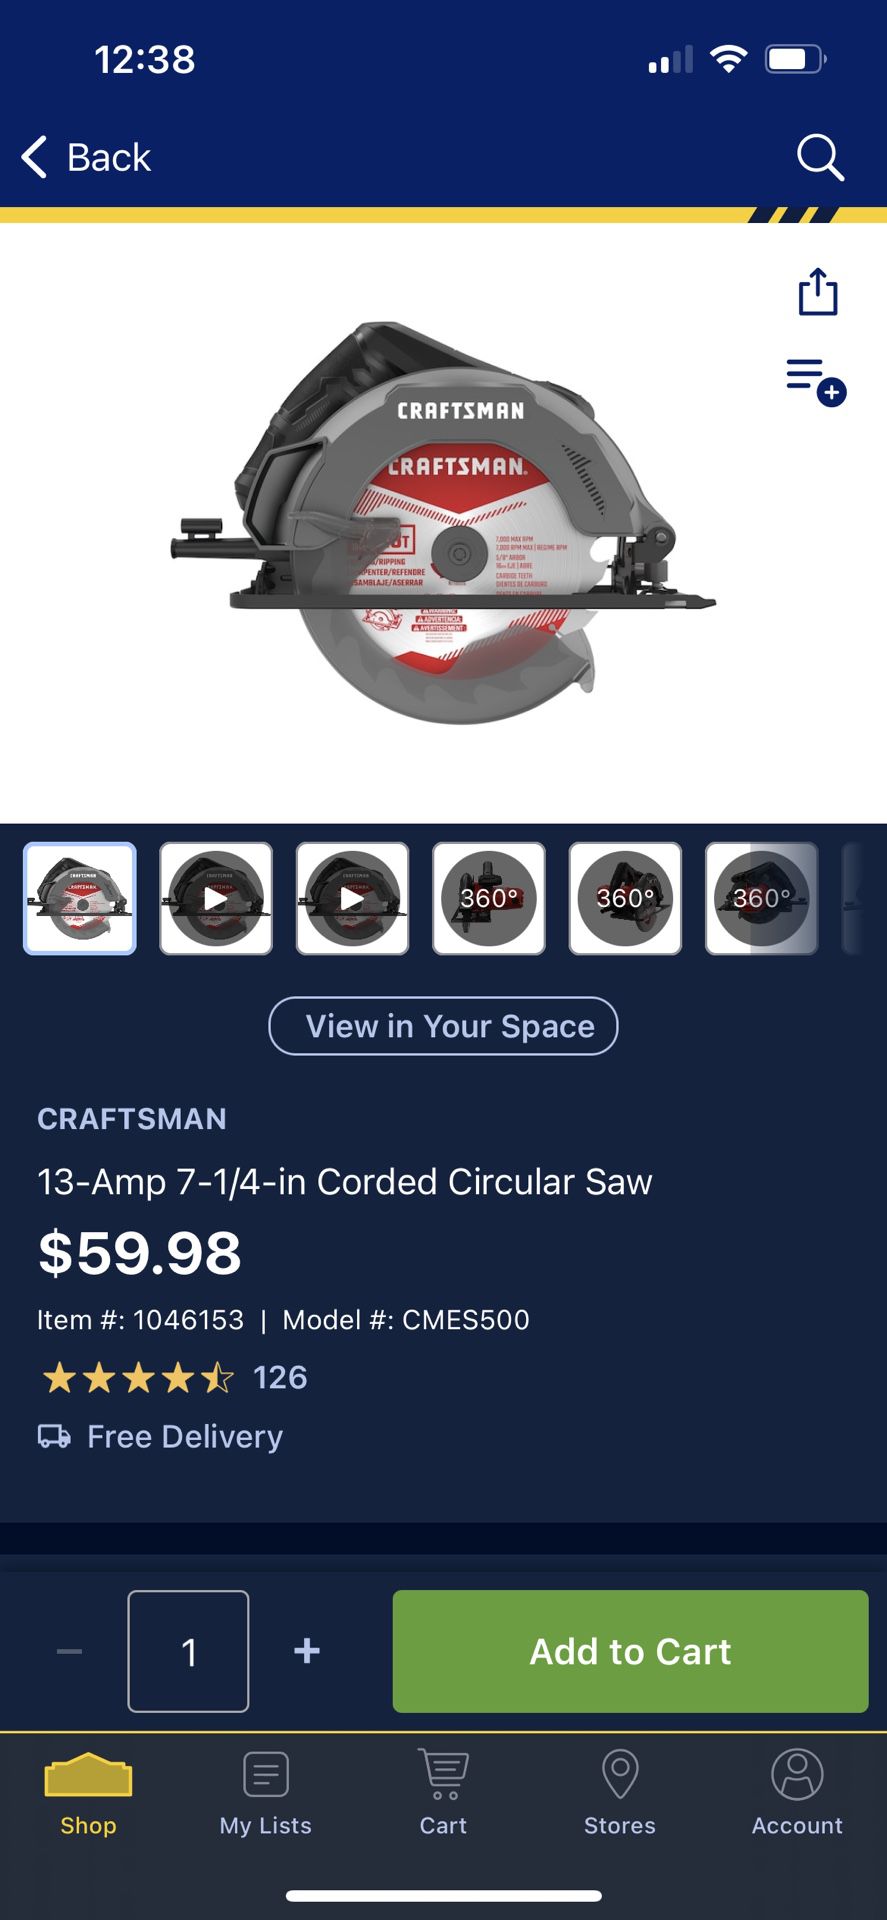 Craftsman Circular Saw (corded model CMES500) for Sale in Faber, VA  OfferUp